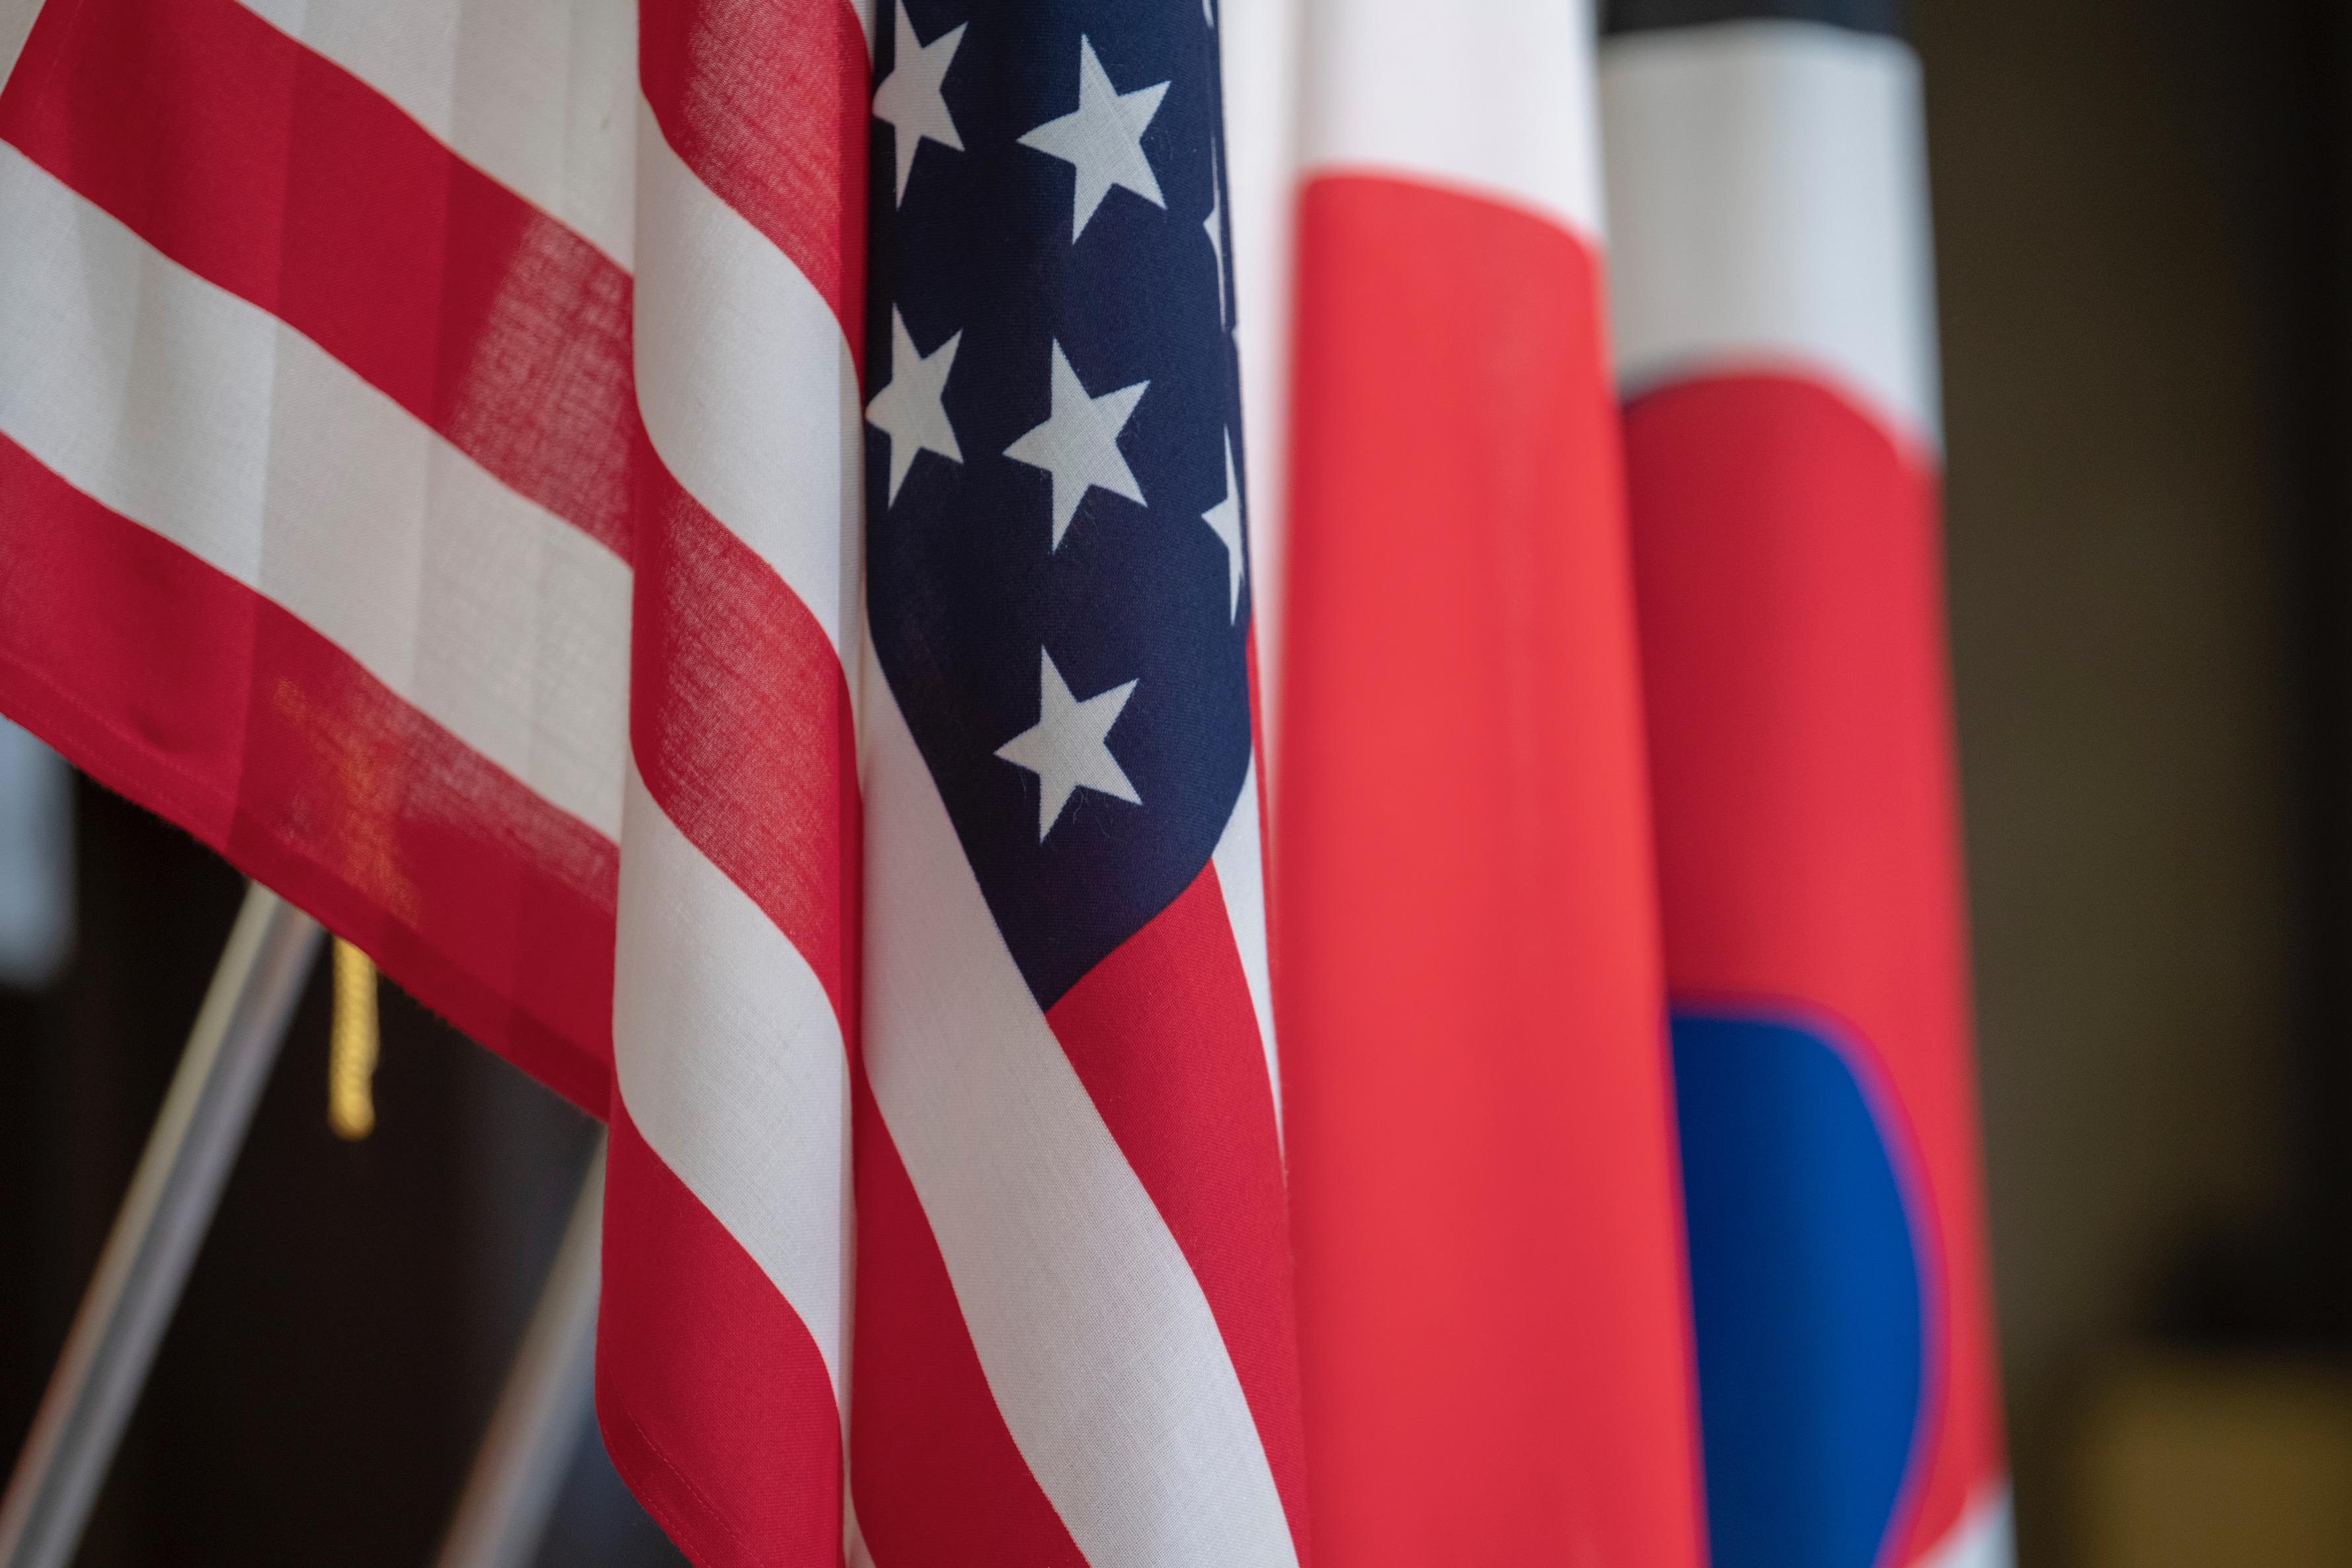 Flags representing the United States, Japan and South Korea